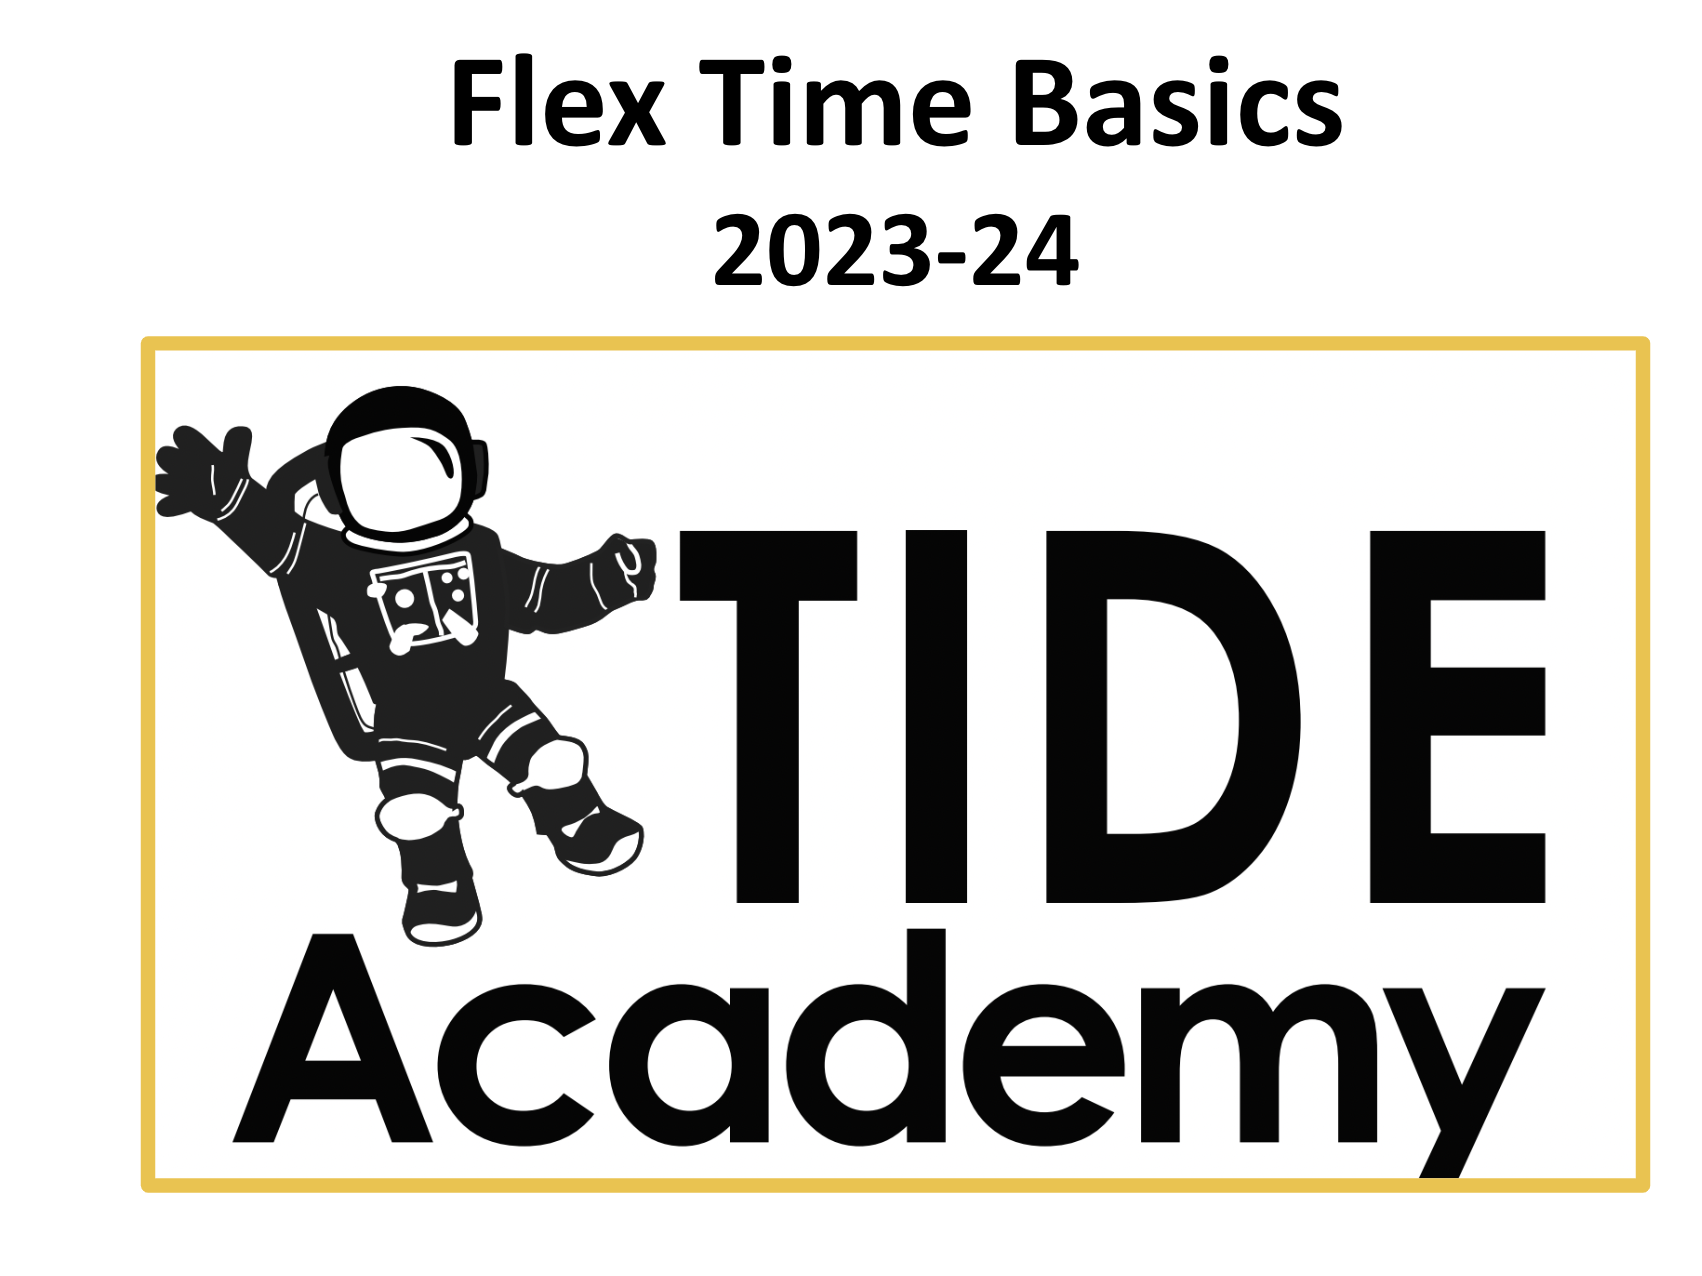 Flex Time Login Instructions and Expectations